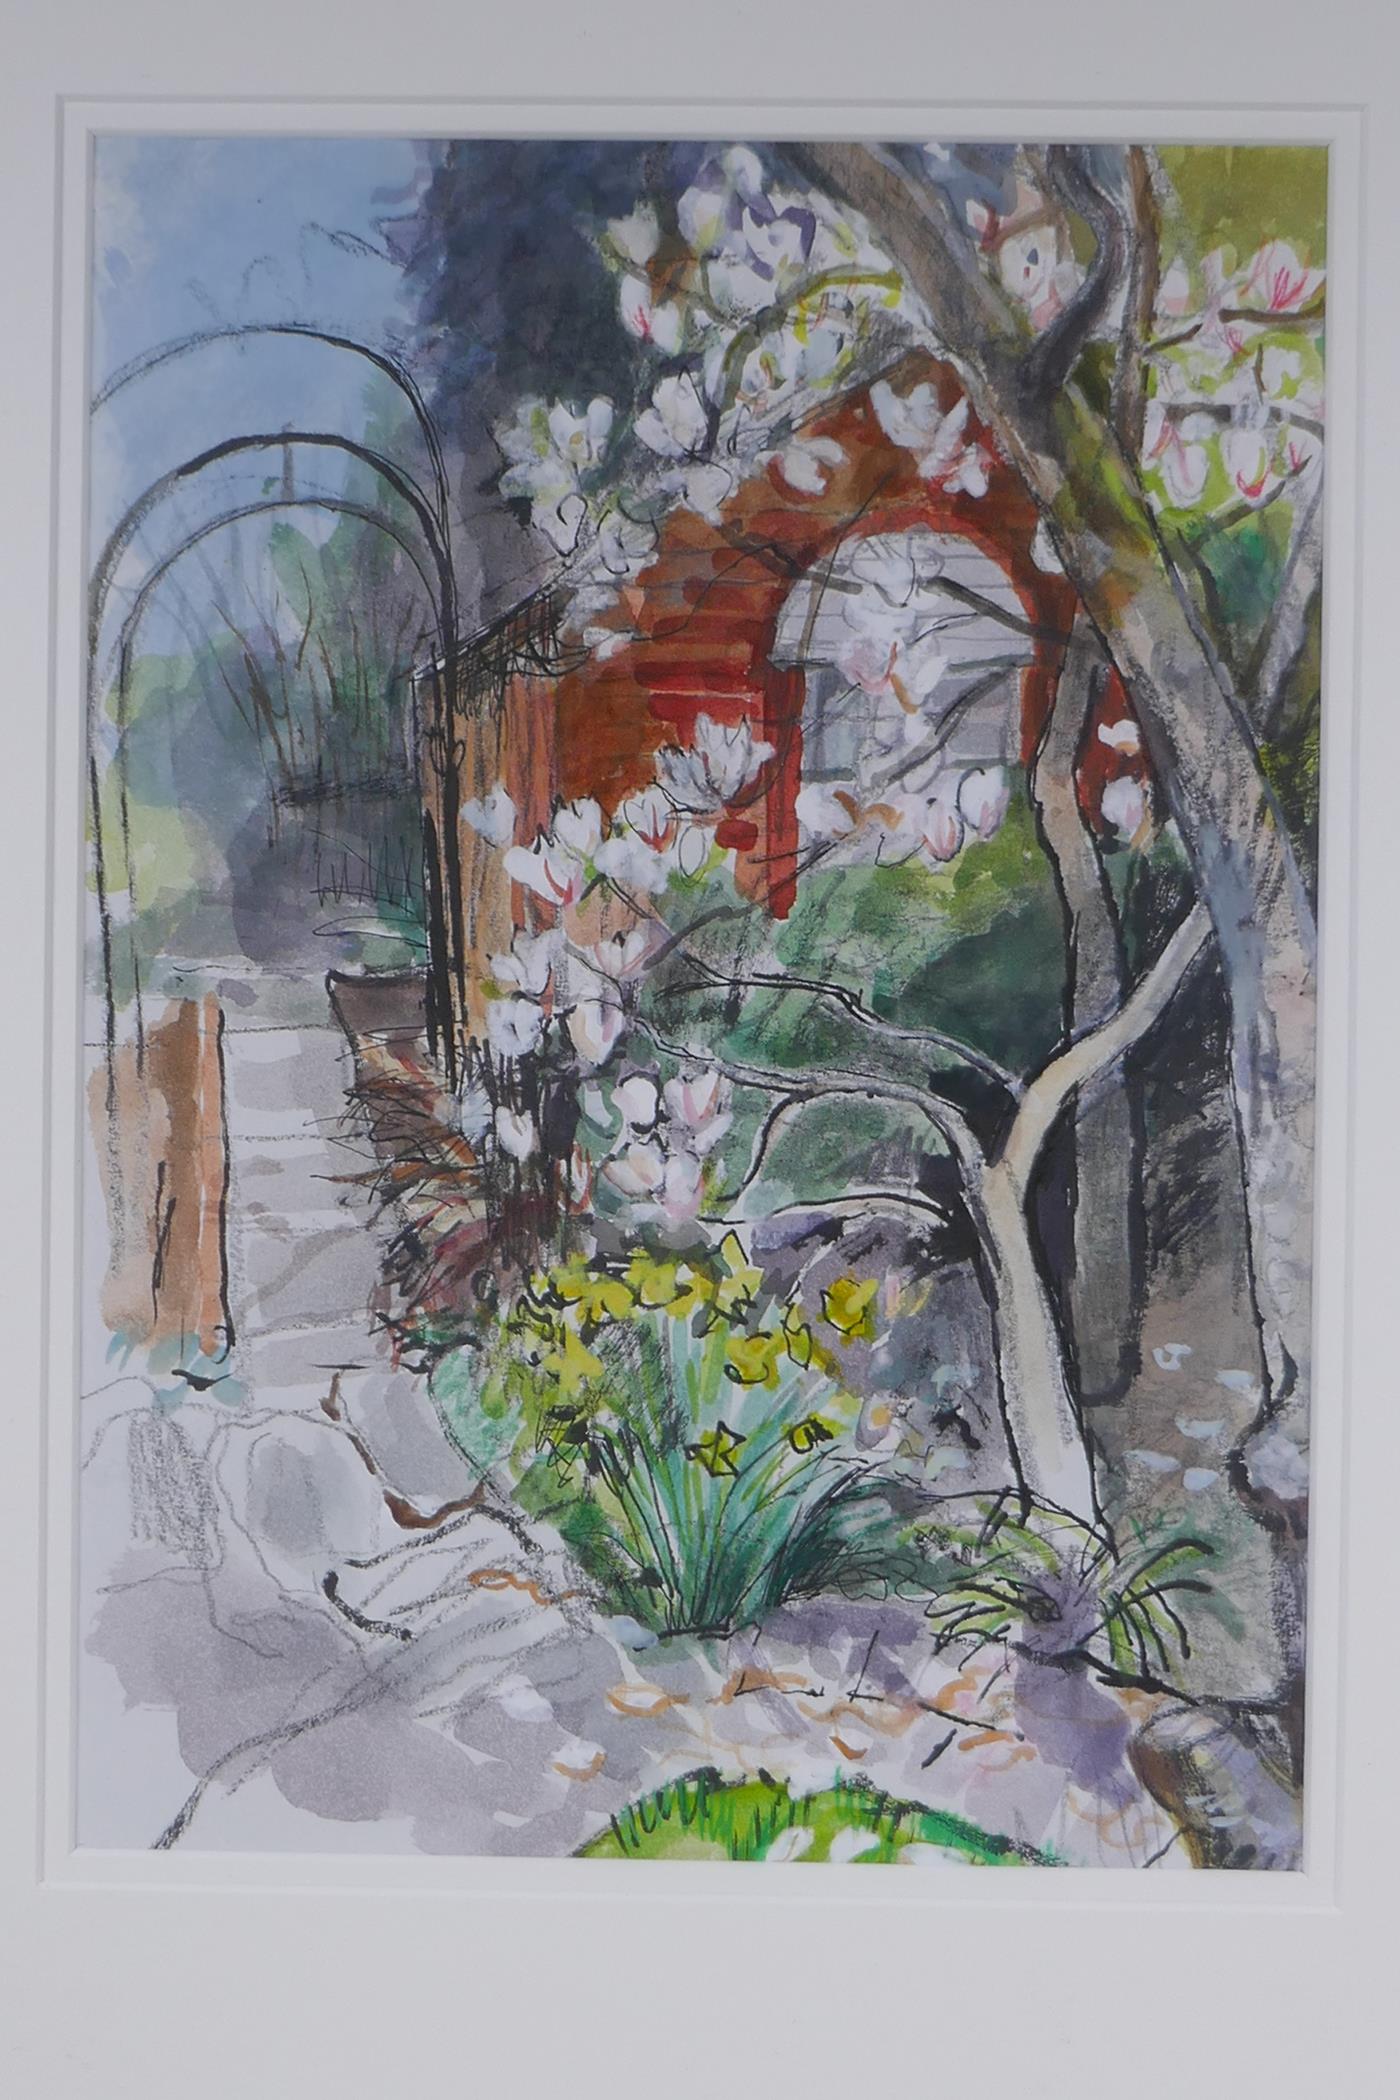 Attributed to David Mcleod Martin, Scottish (1922-2018), garden landscape, mixed media on paper, - Image 2 of 4